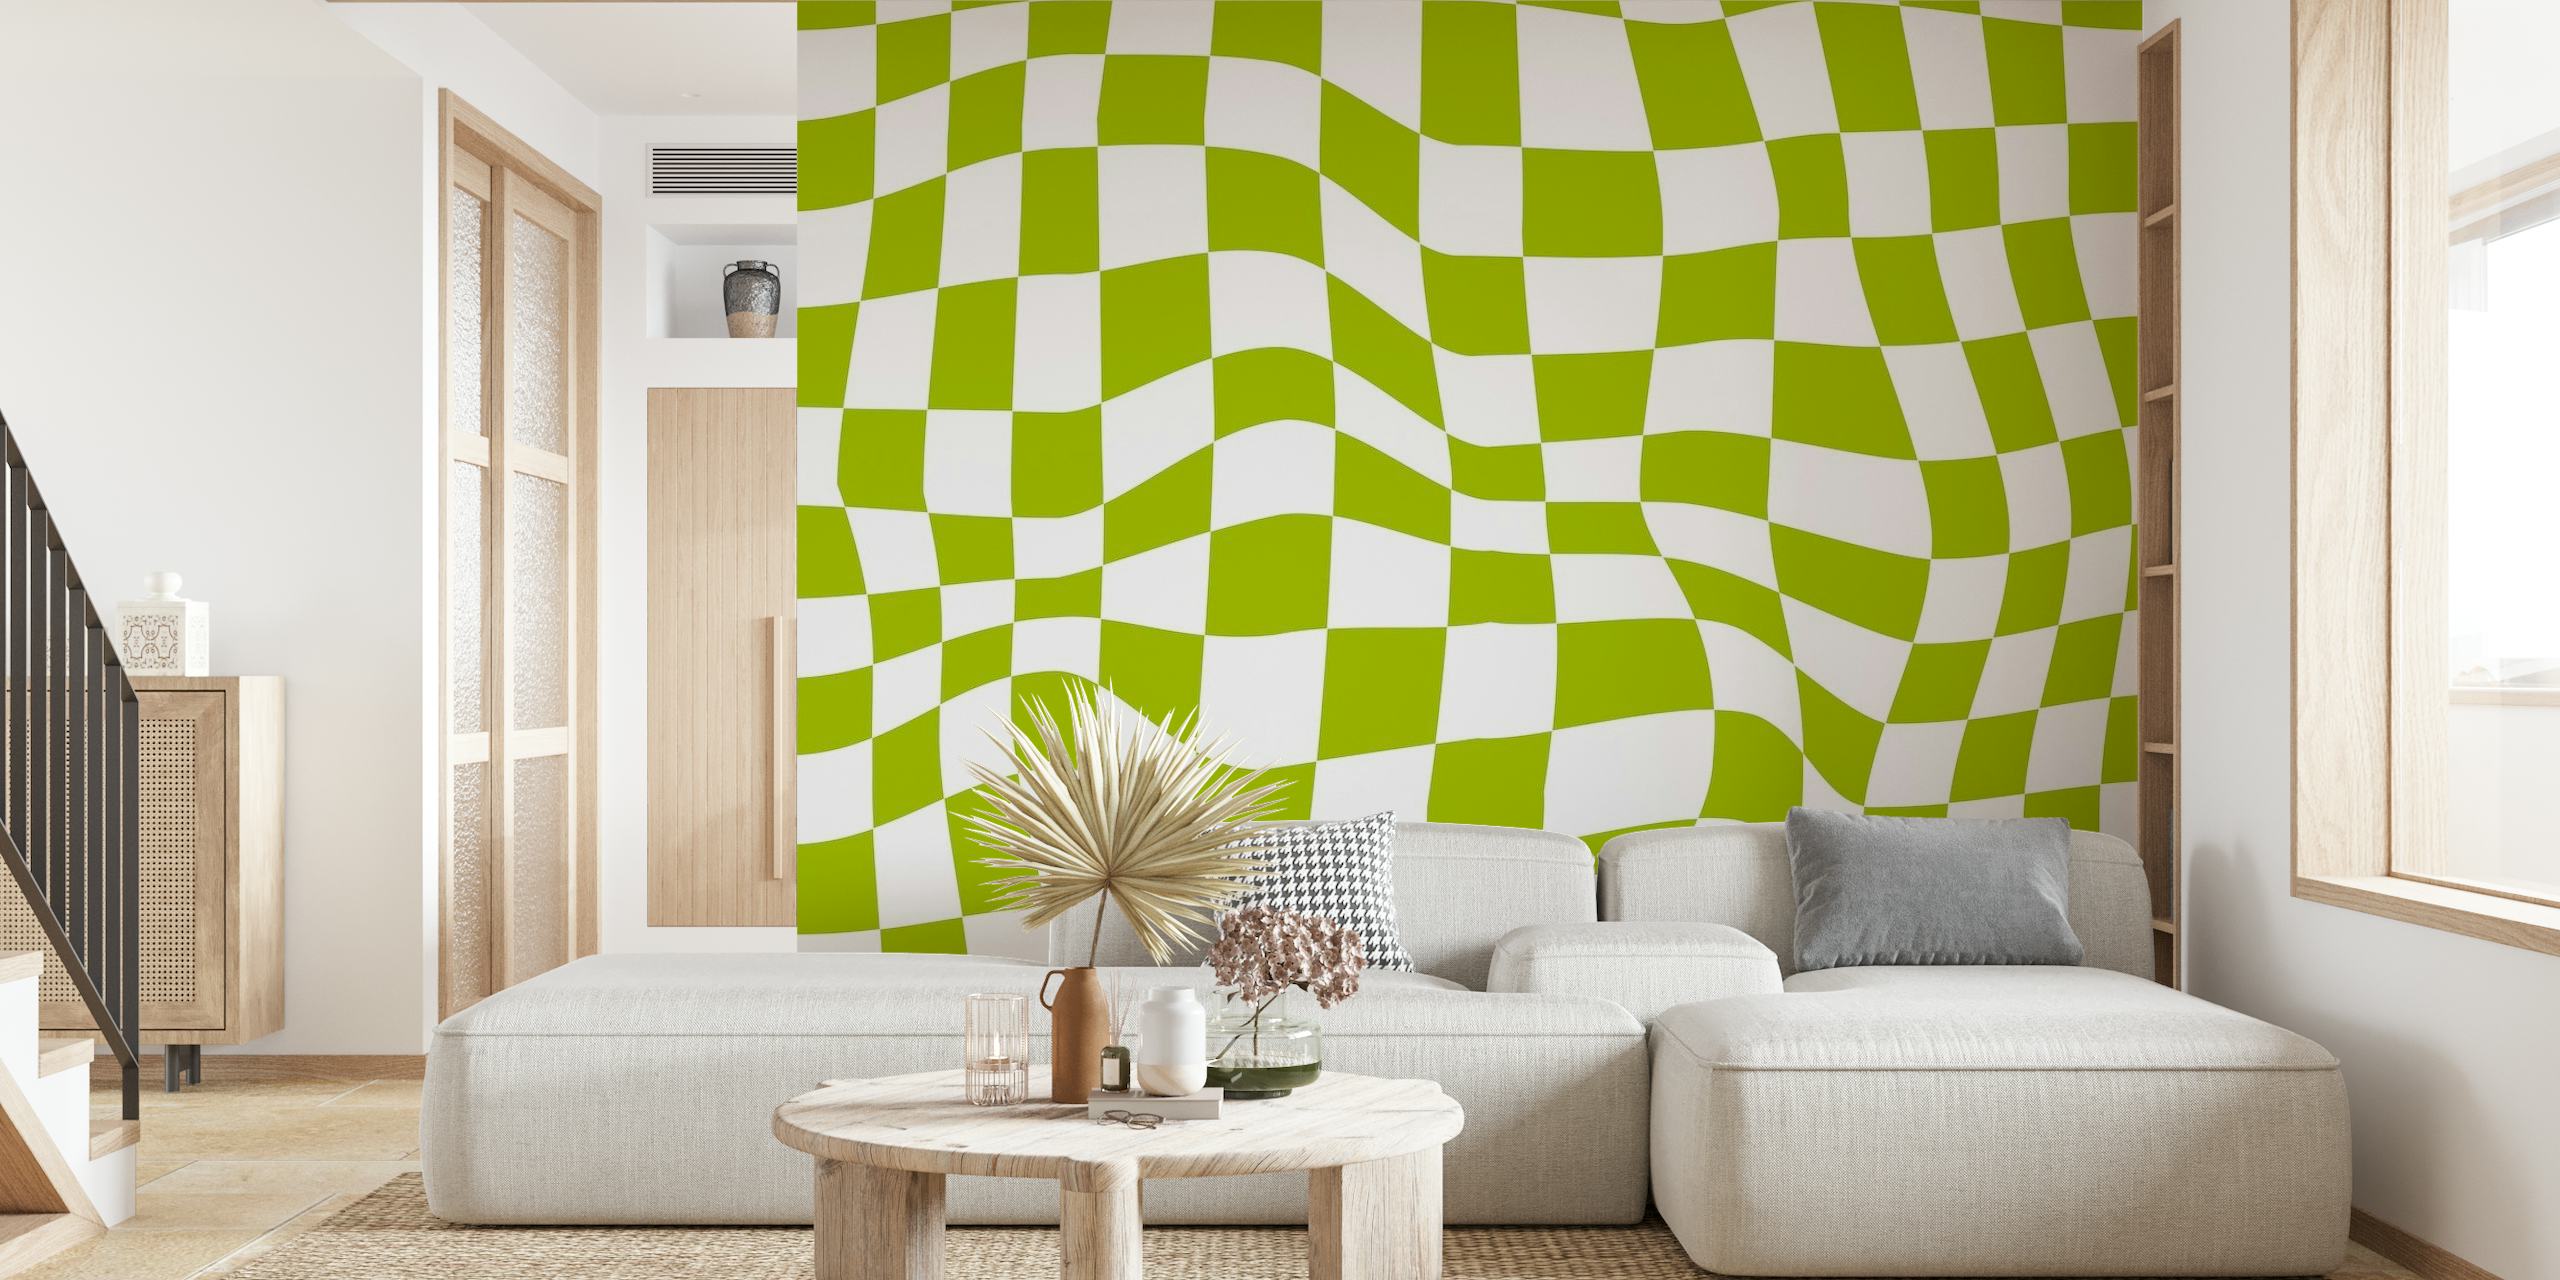 Vintage green and white checkered wallpaper showcasing a vibrant retro 60s pattern